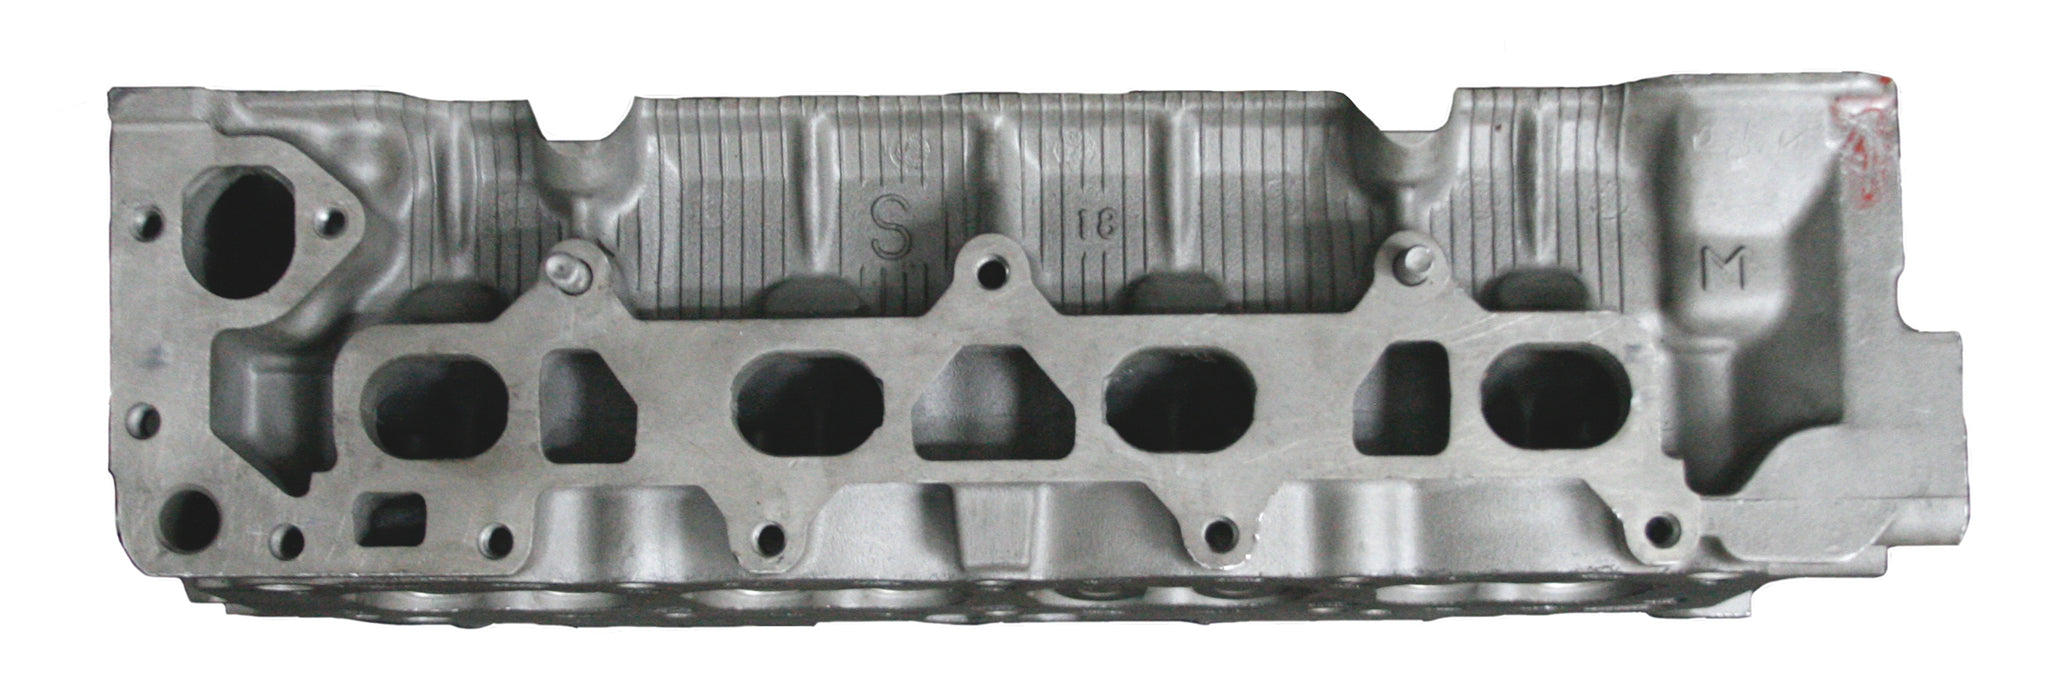 1988-1997 Toyota Corolla 1.6L DOHC Cylinder Head Casting # 4AFE (w/Fuel Pump) Carbureted Only